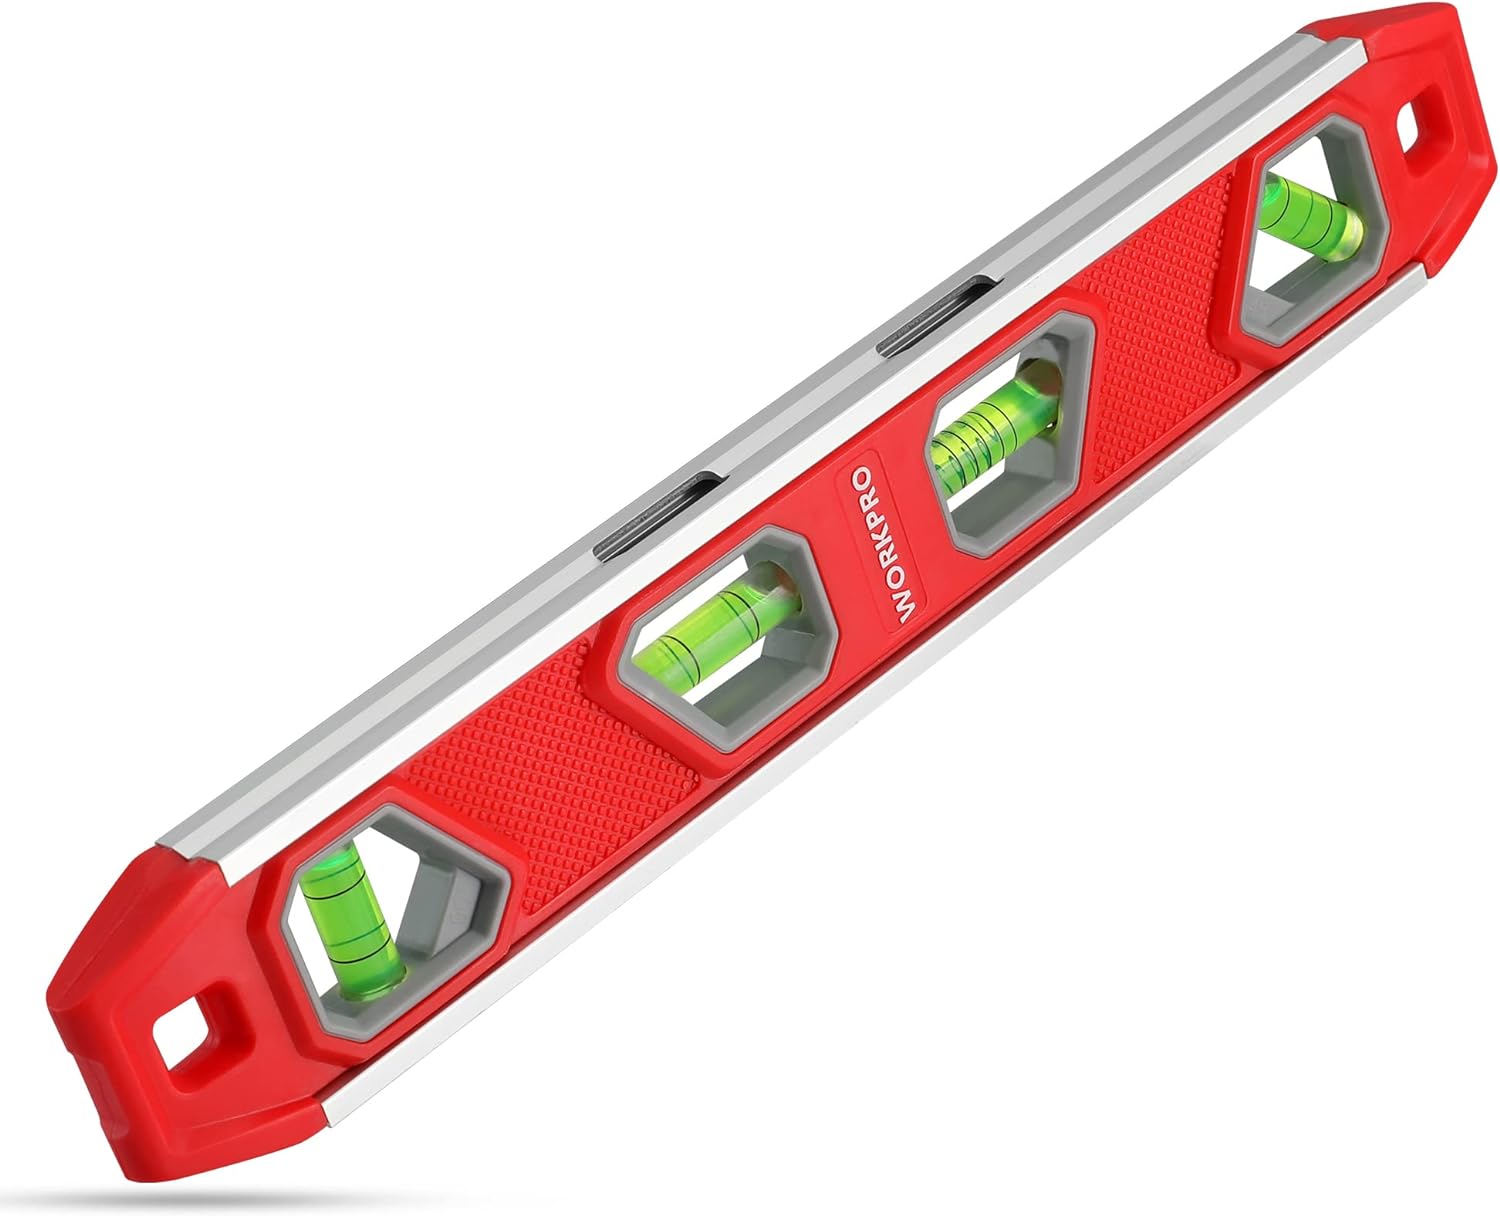 WORKPRO 12 Inch Torpedo Level Review